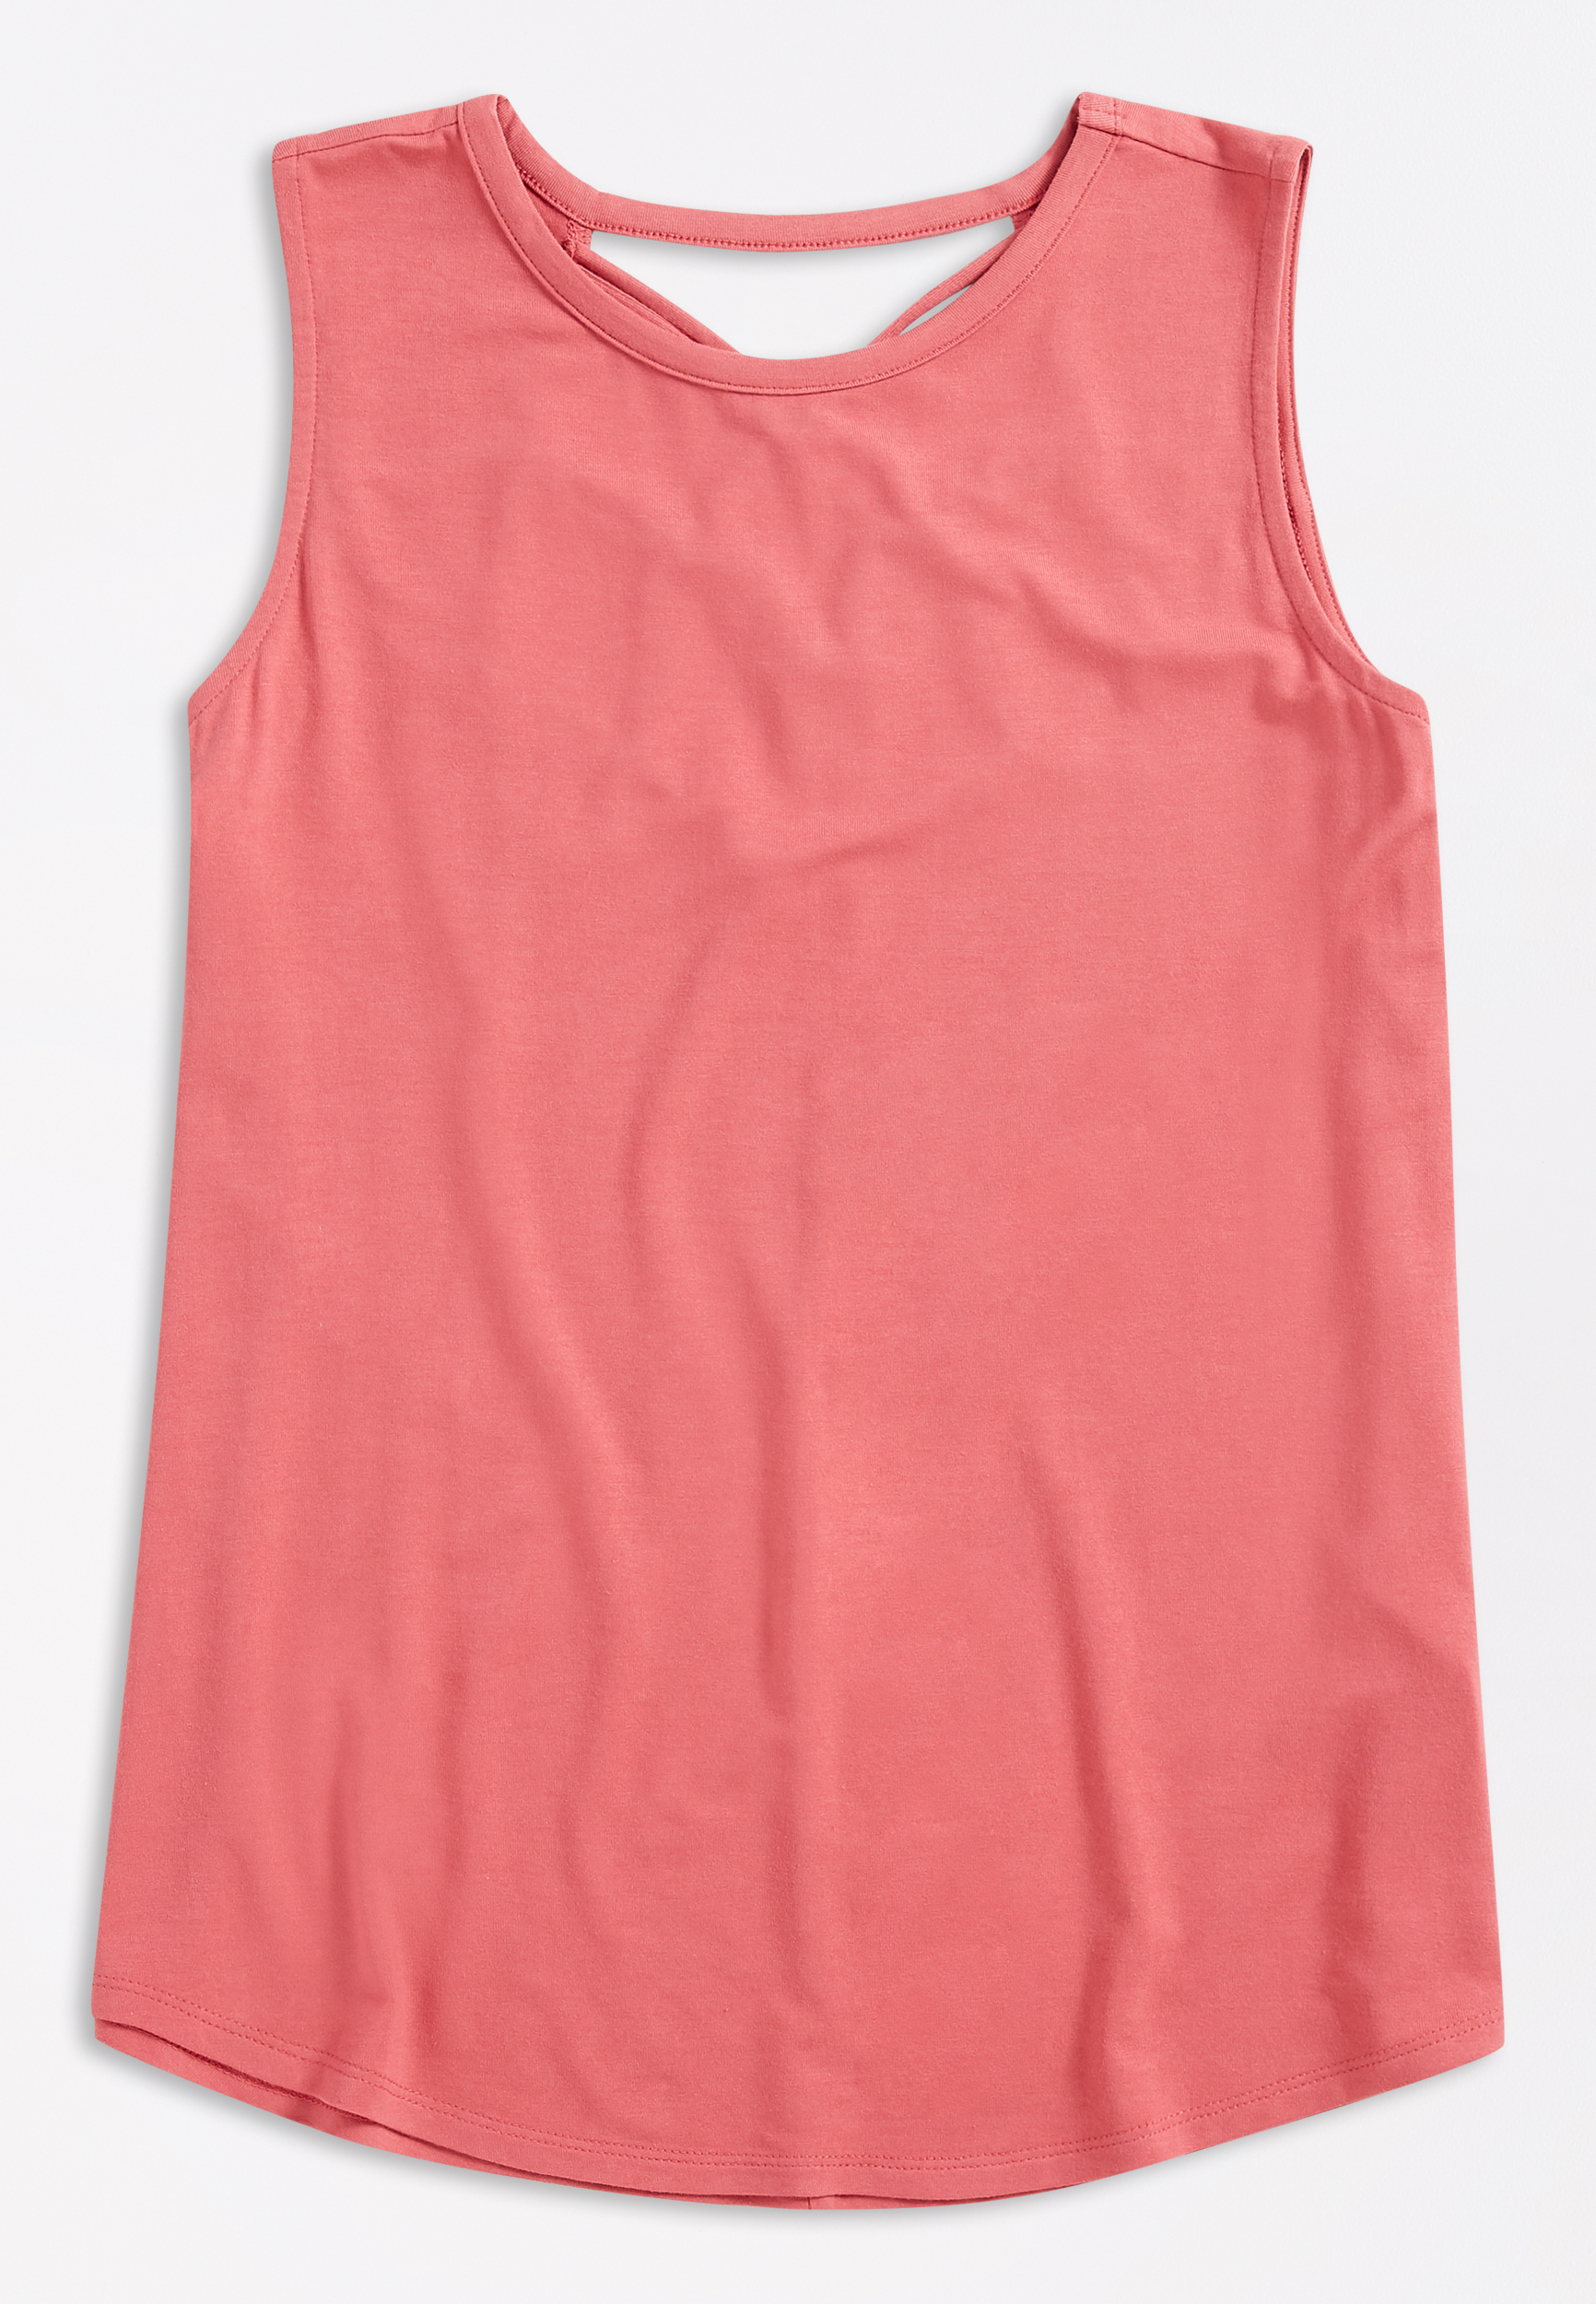 24/7 Solid Pink Strappy Back Tank Top | maurices